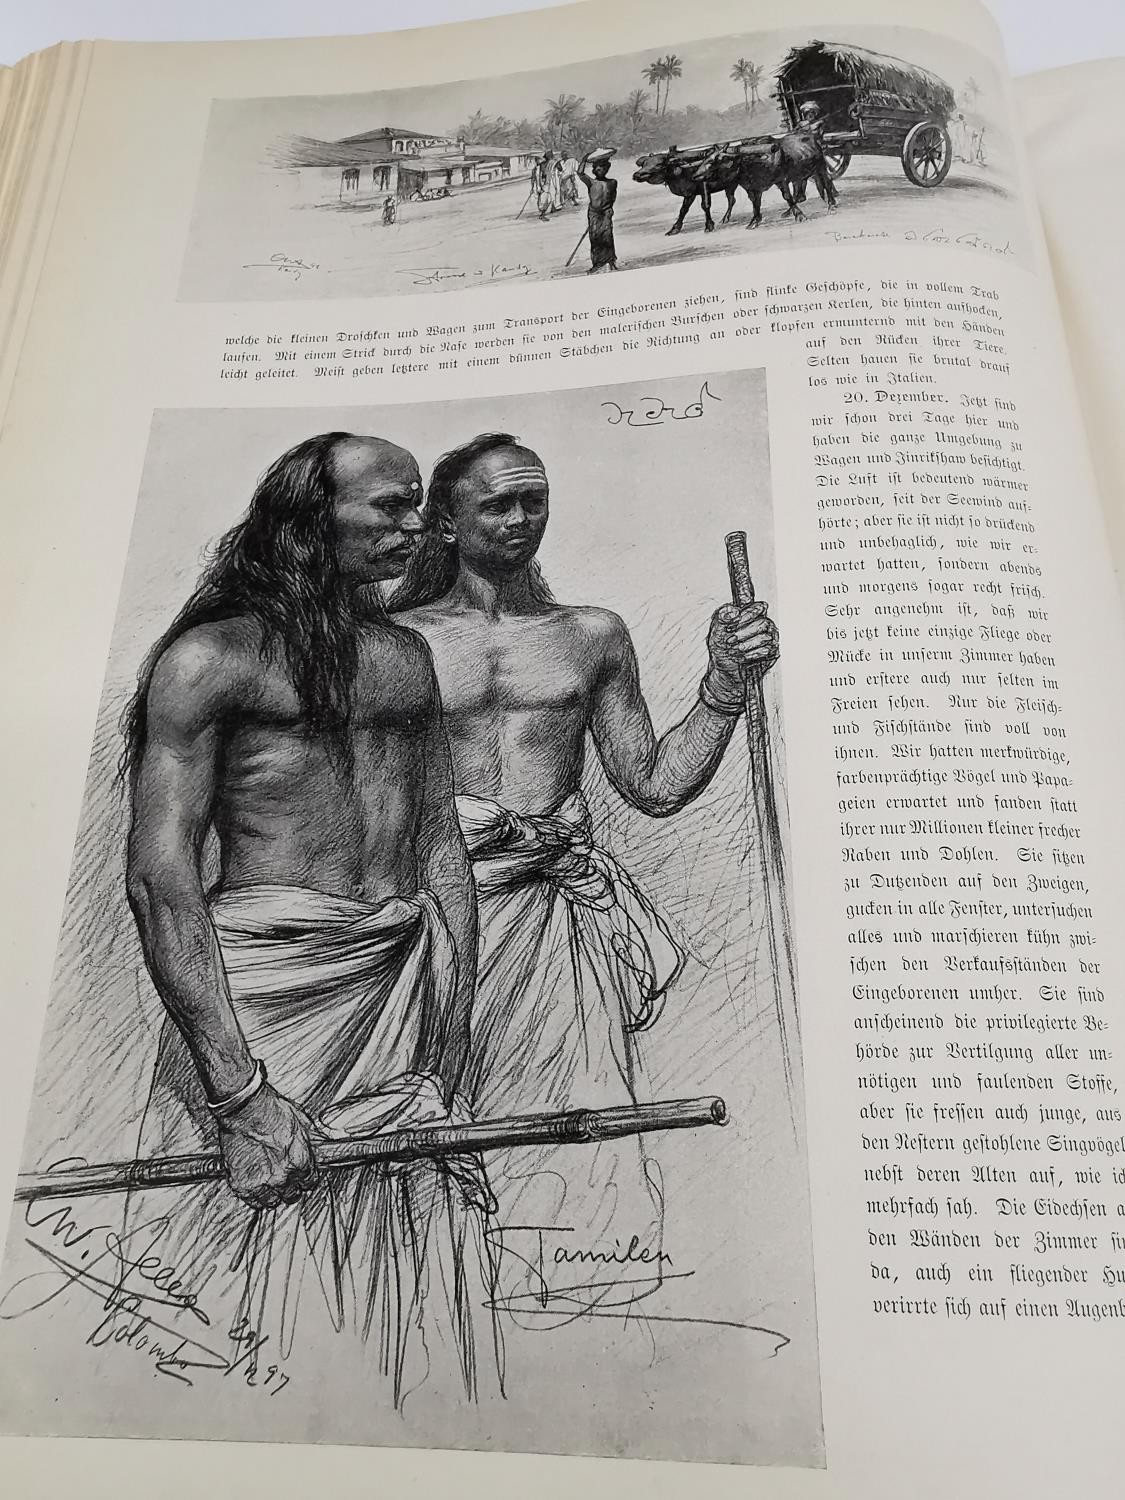 A German book showing drawings of natives of the far east Asia titled 'Rund um die Erde' (1898) by - Image 9 of 20